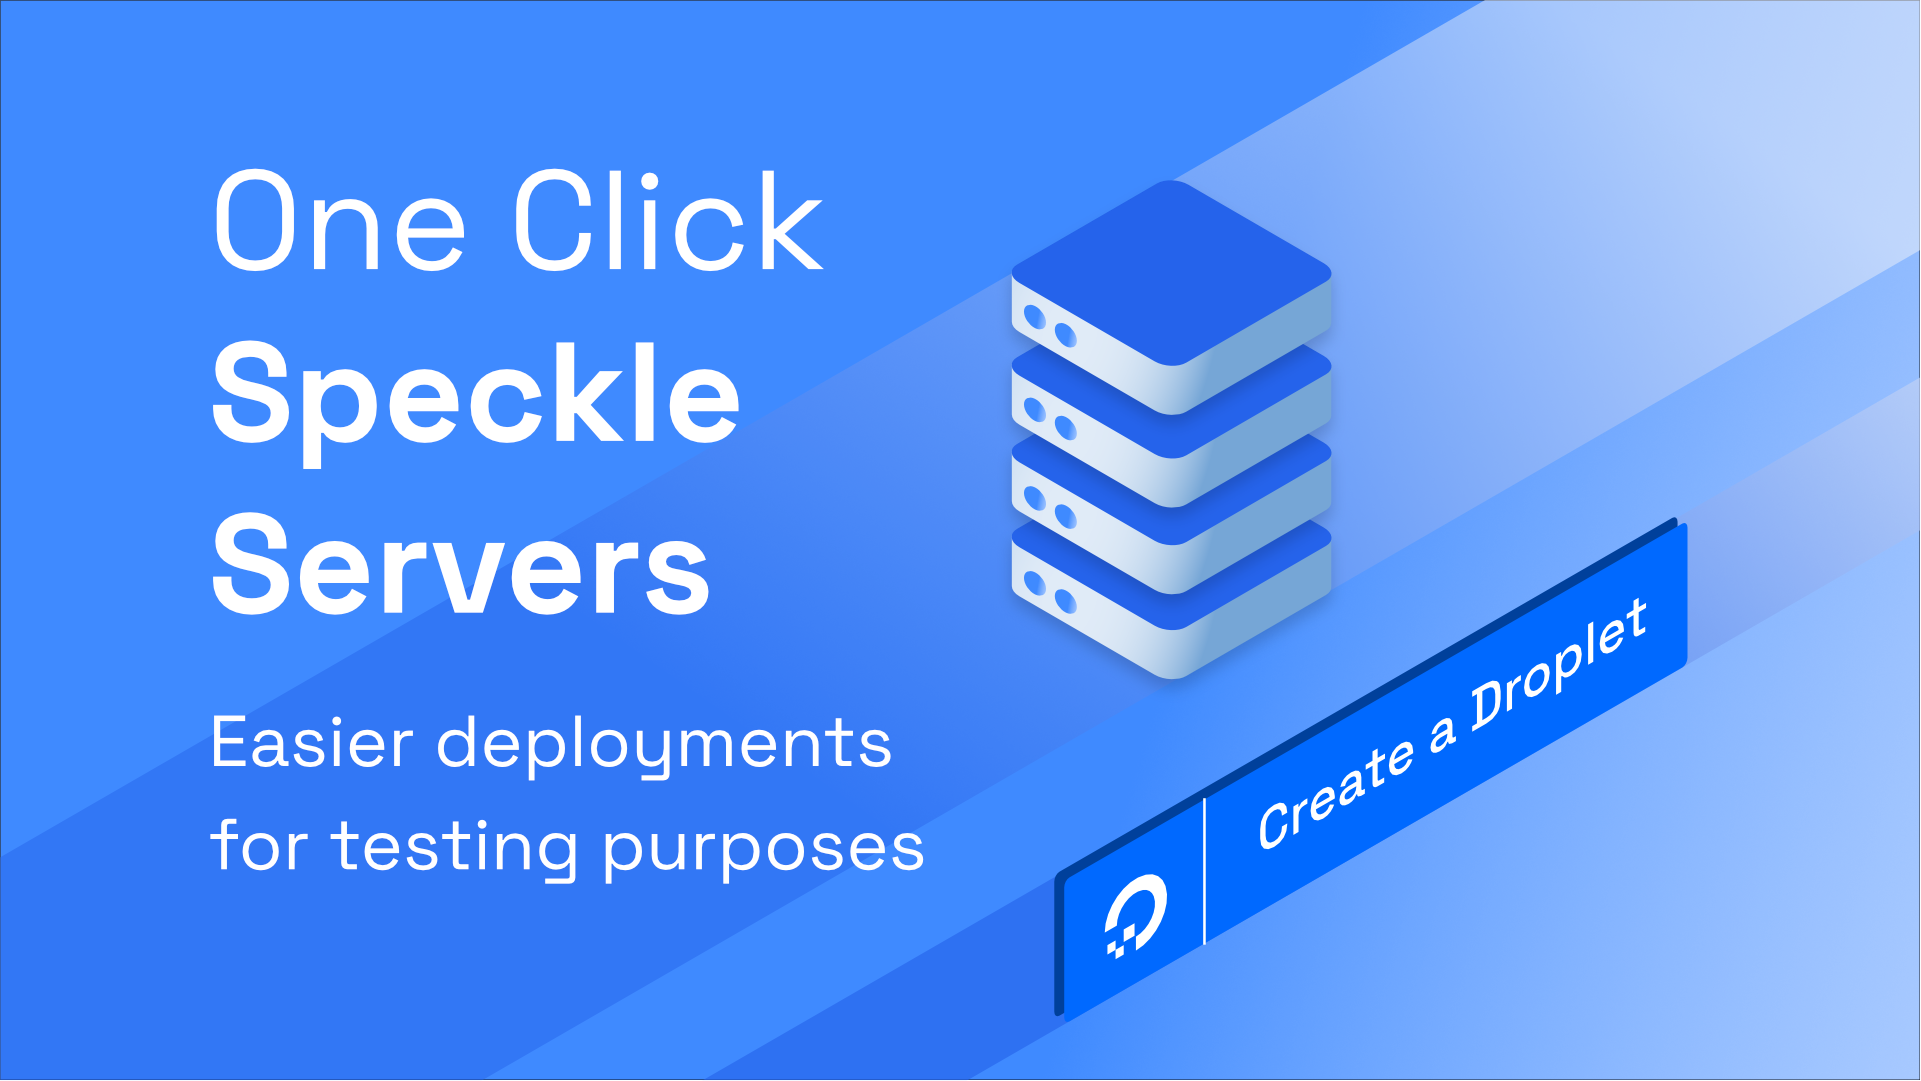 One Click Speckle Servers